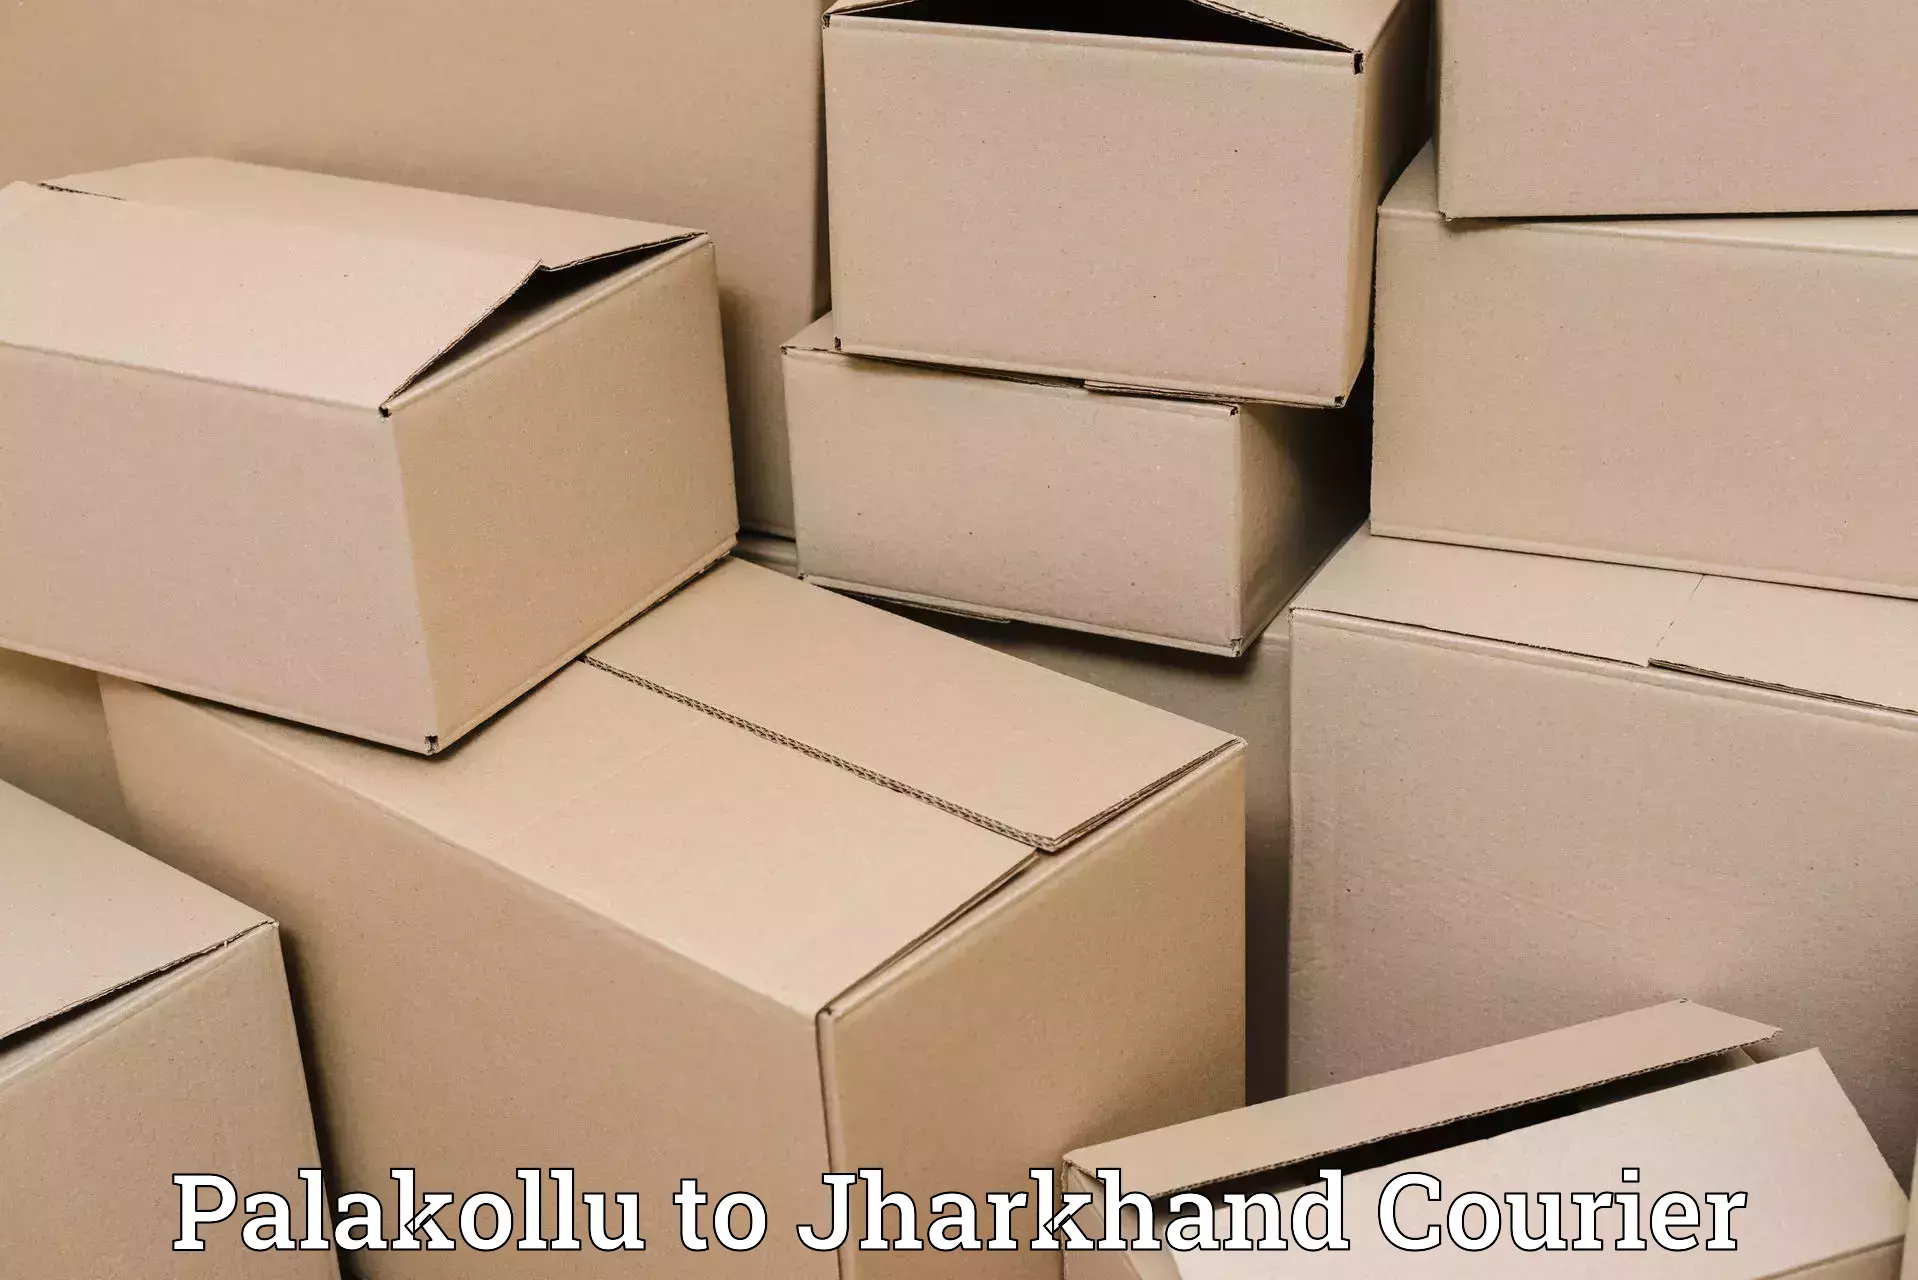 Easy access courier services Palakollu to Chatra